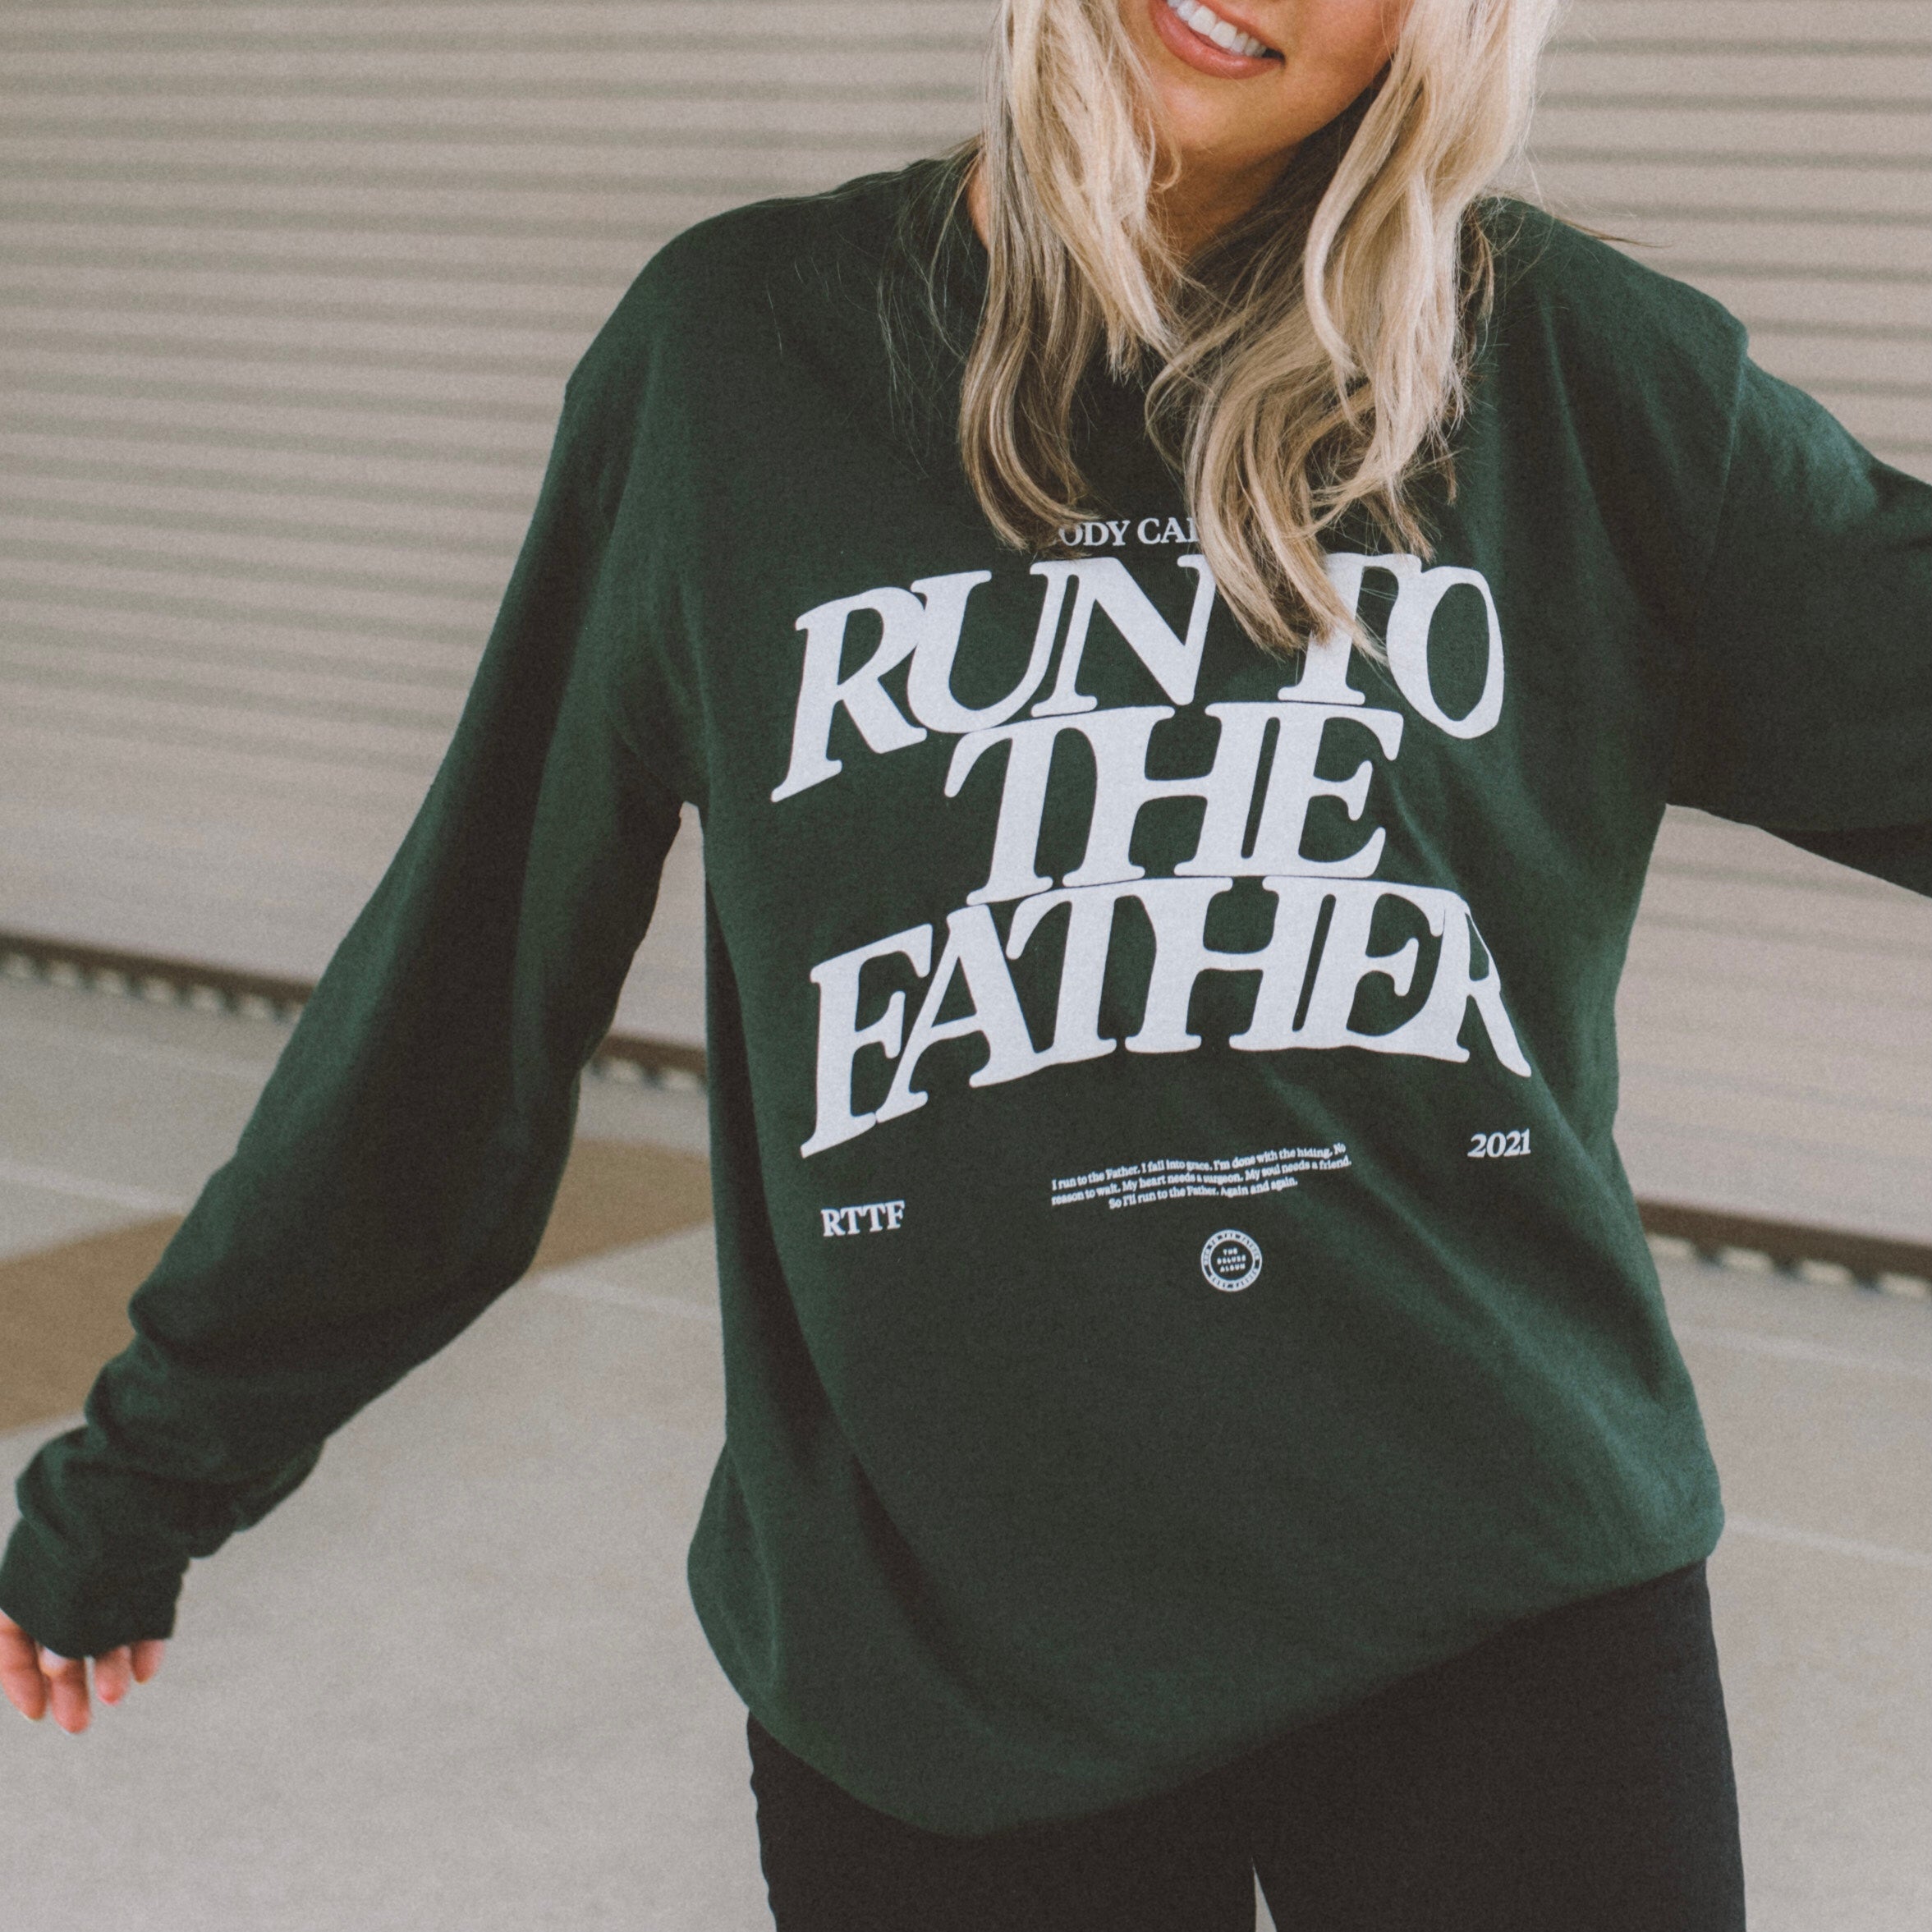 RUN TO THE FATHER (GREEN) - UNISEX LONG SLEEVE